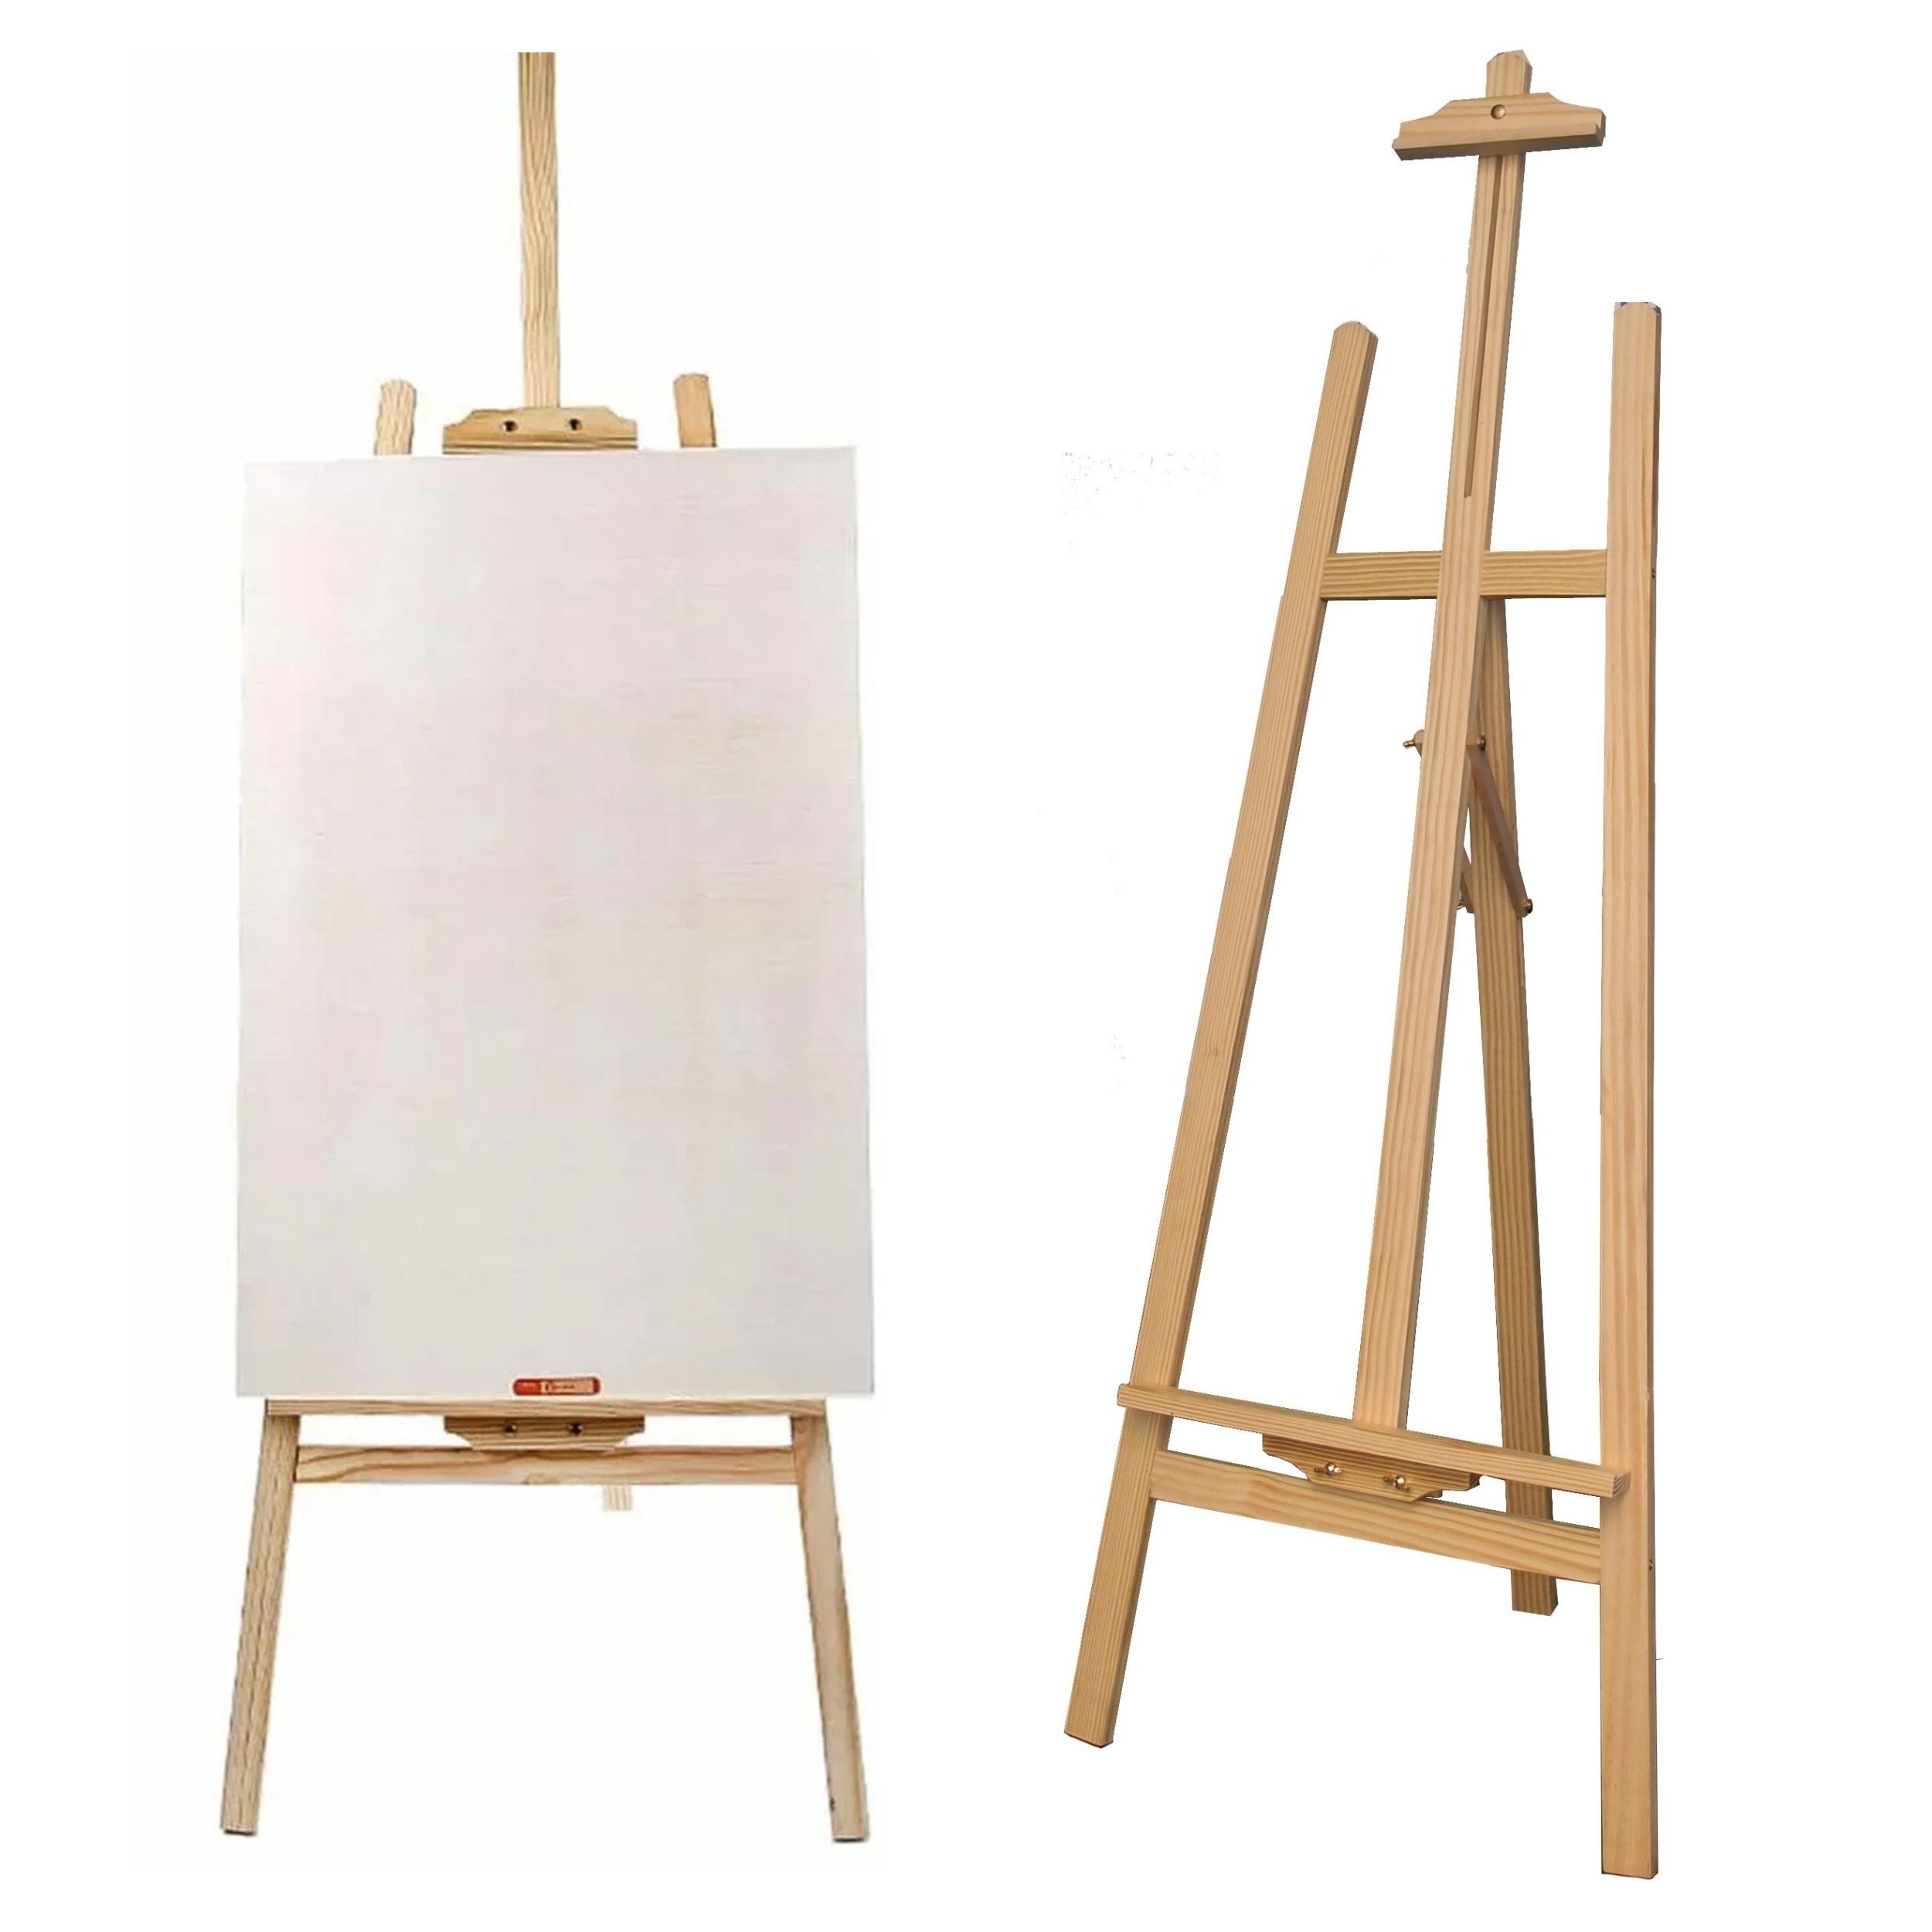 uyoyous Adjustable Height Wood A-Frame Art Easel Stand for Painting, Size: Total Height: 150cm / 59, Brown